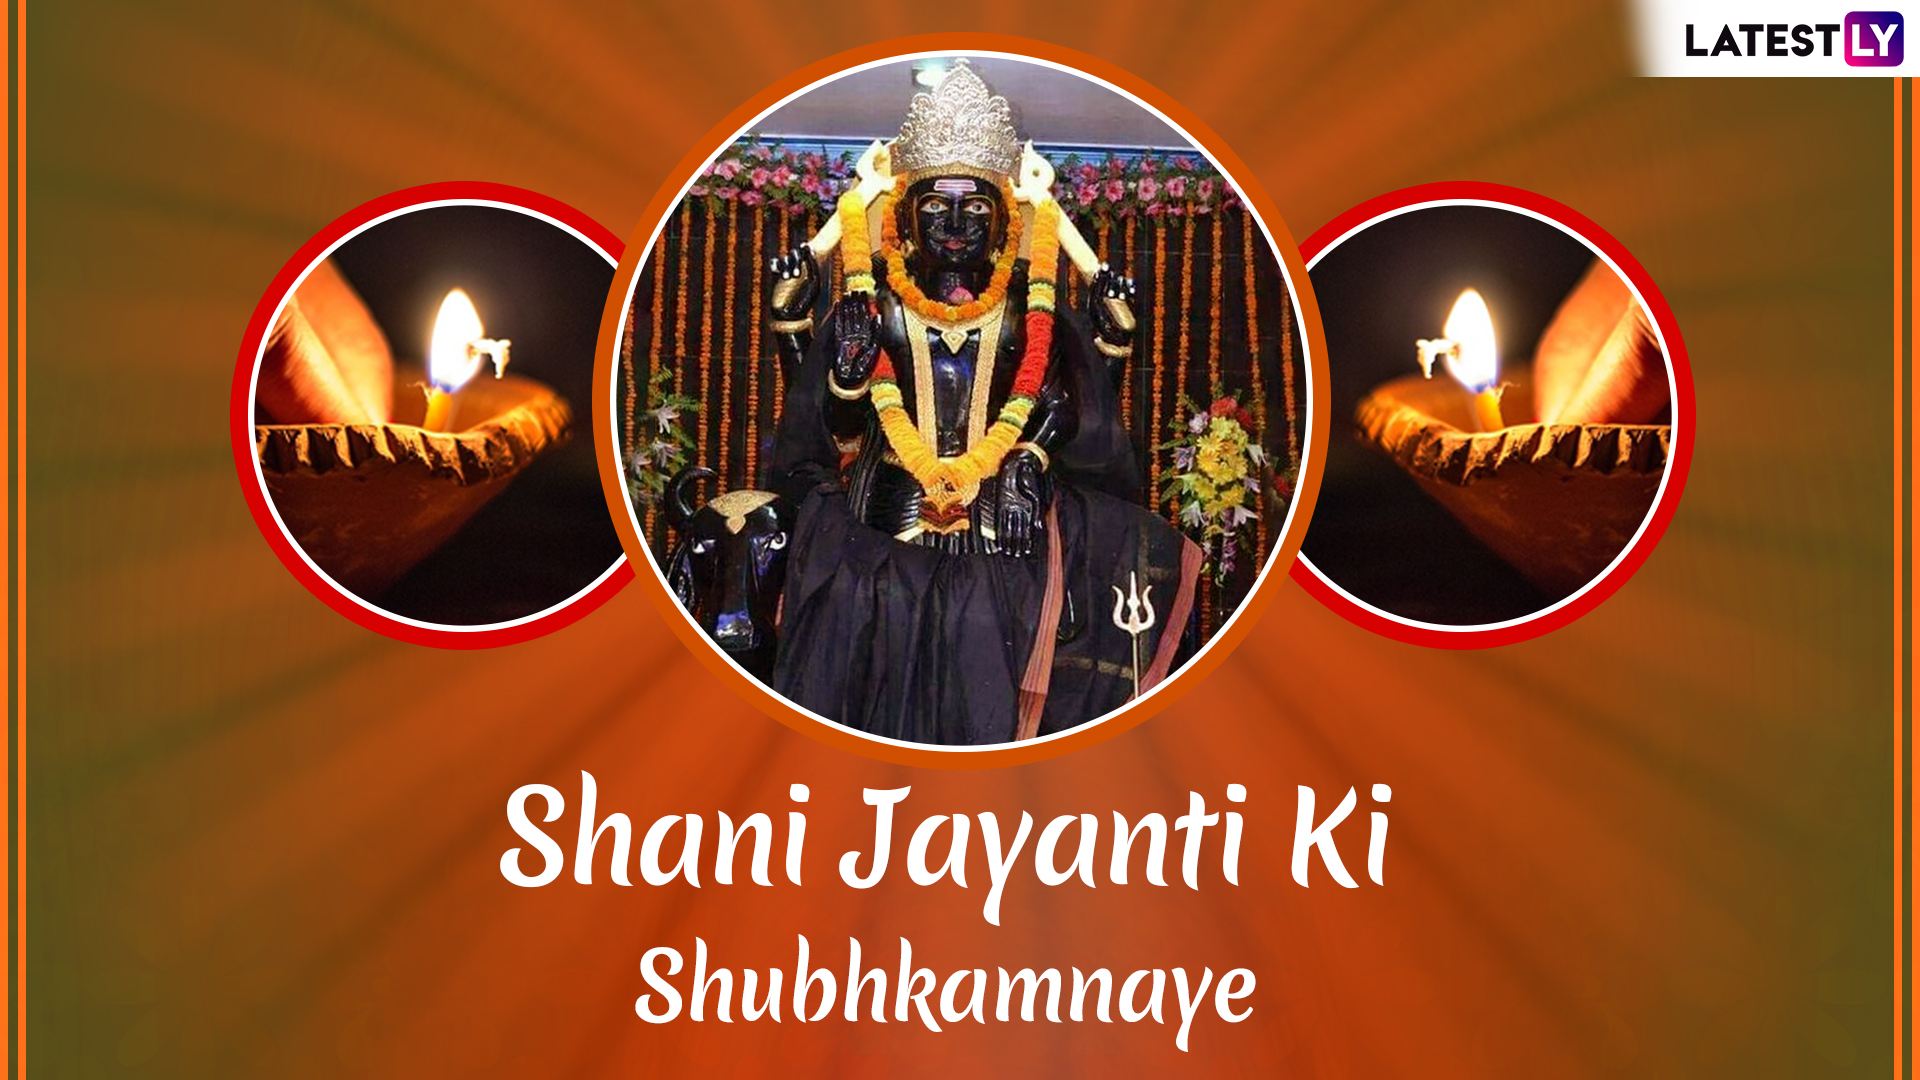 Shani Jayanti Images Hd Wallpapers For Free Download Online Wish Happy Shani Jayanti 19 With Gif Greetings Whatsapp Sticker Messages Latestly